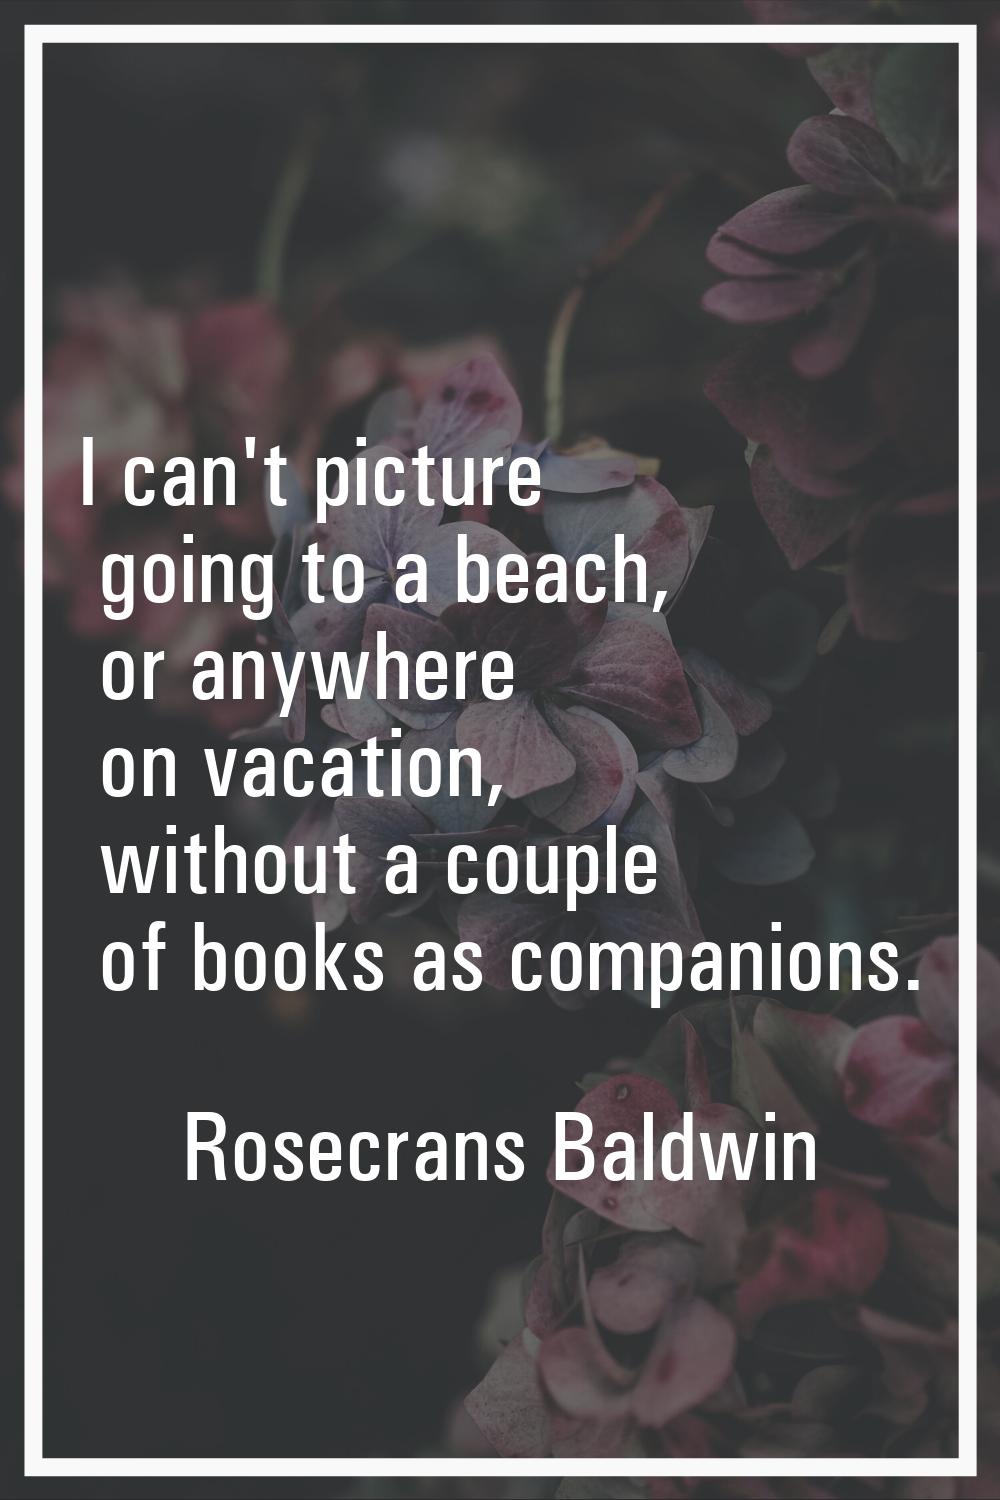 I can't picture going to a beach, or anywhere on vacation, without a couple of books as companions.